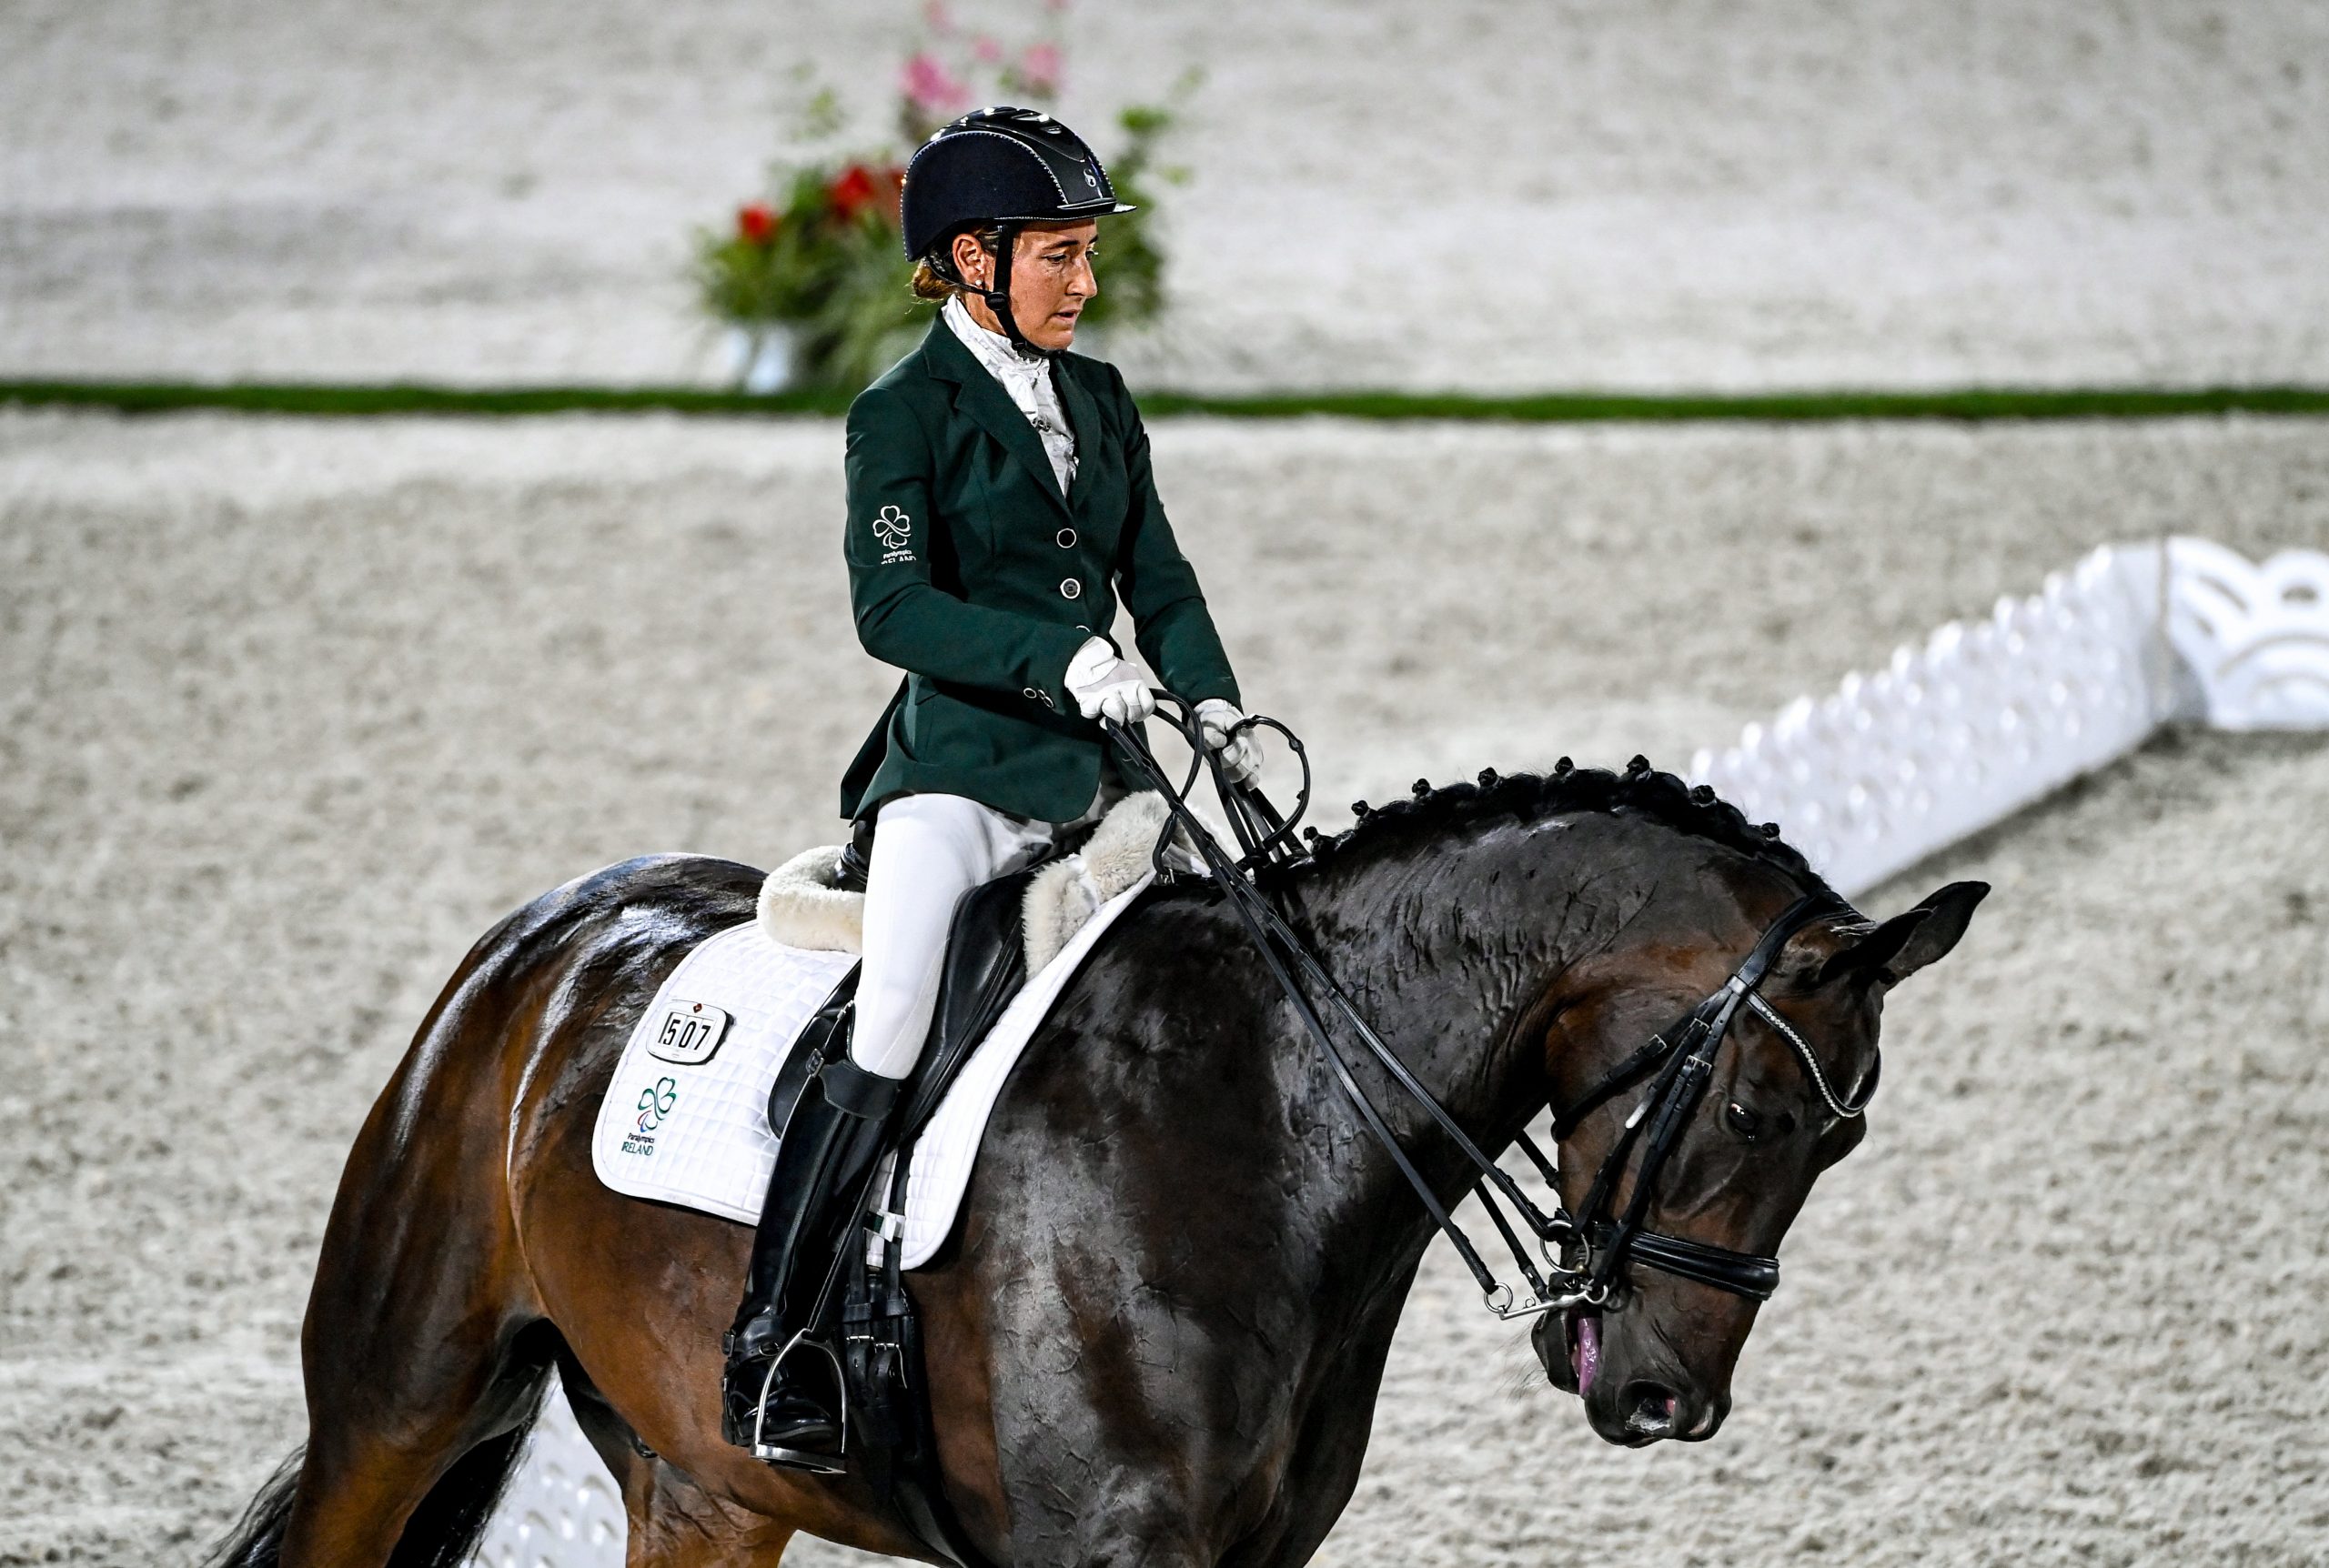 26 August 2021; Tamsin Addison of Ireland on Fahrenheit competes in the Grade V Dressage Individual Test at the Equestrian Park on day two during the Tokyo 2020 Paralympic Games in Tokyo, Japan. Photo by Sportsfile